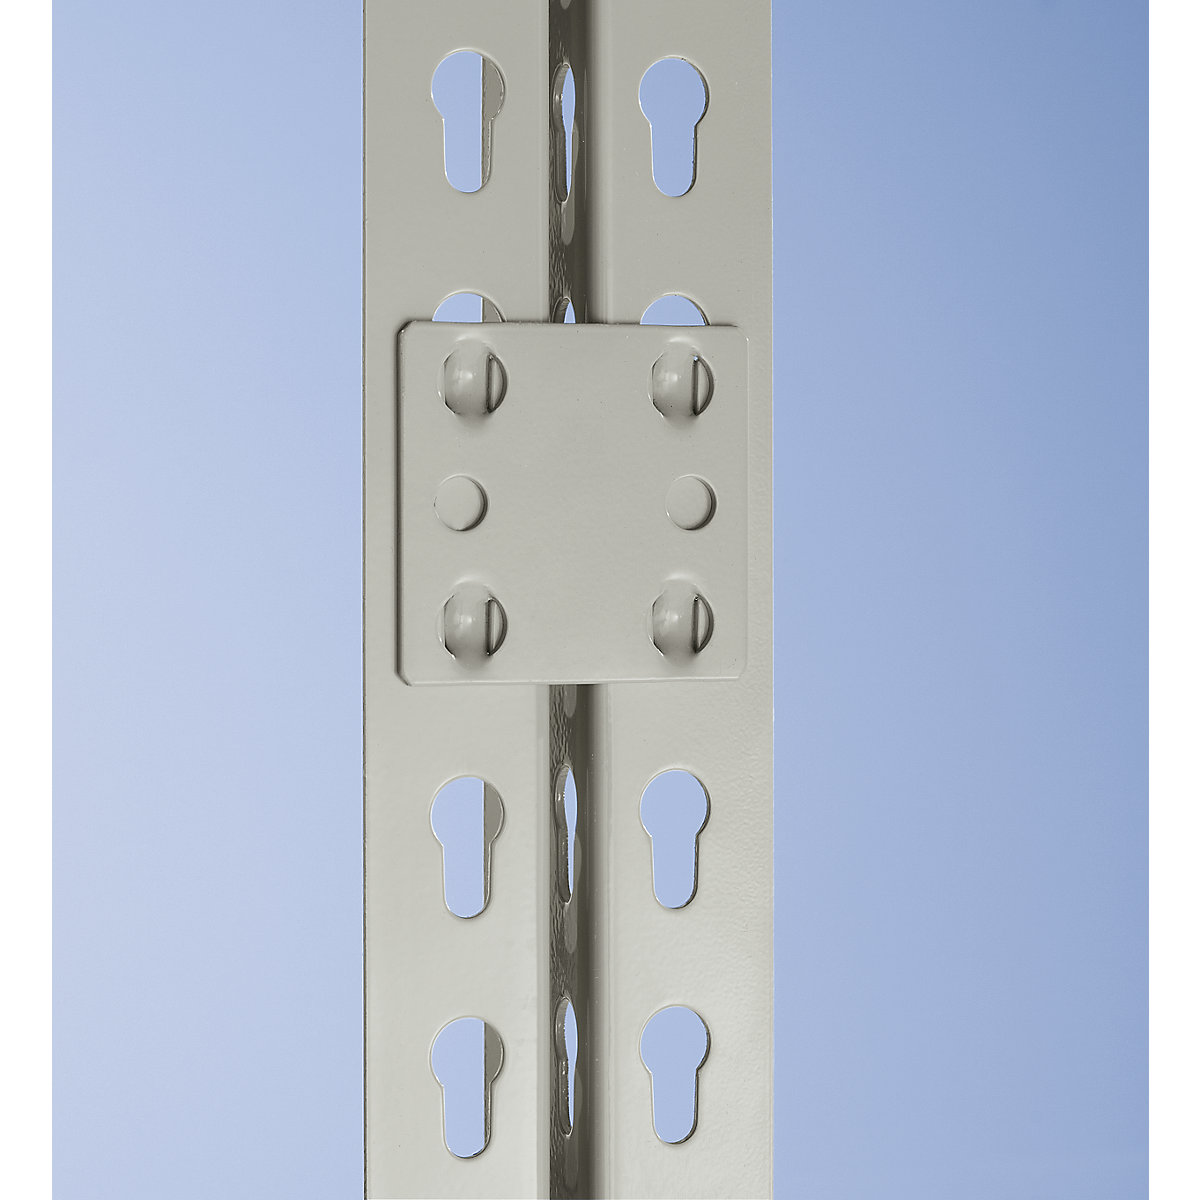 Combination boltless shelving component